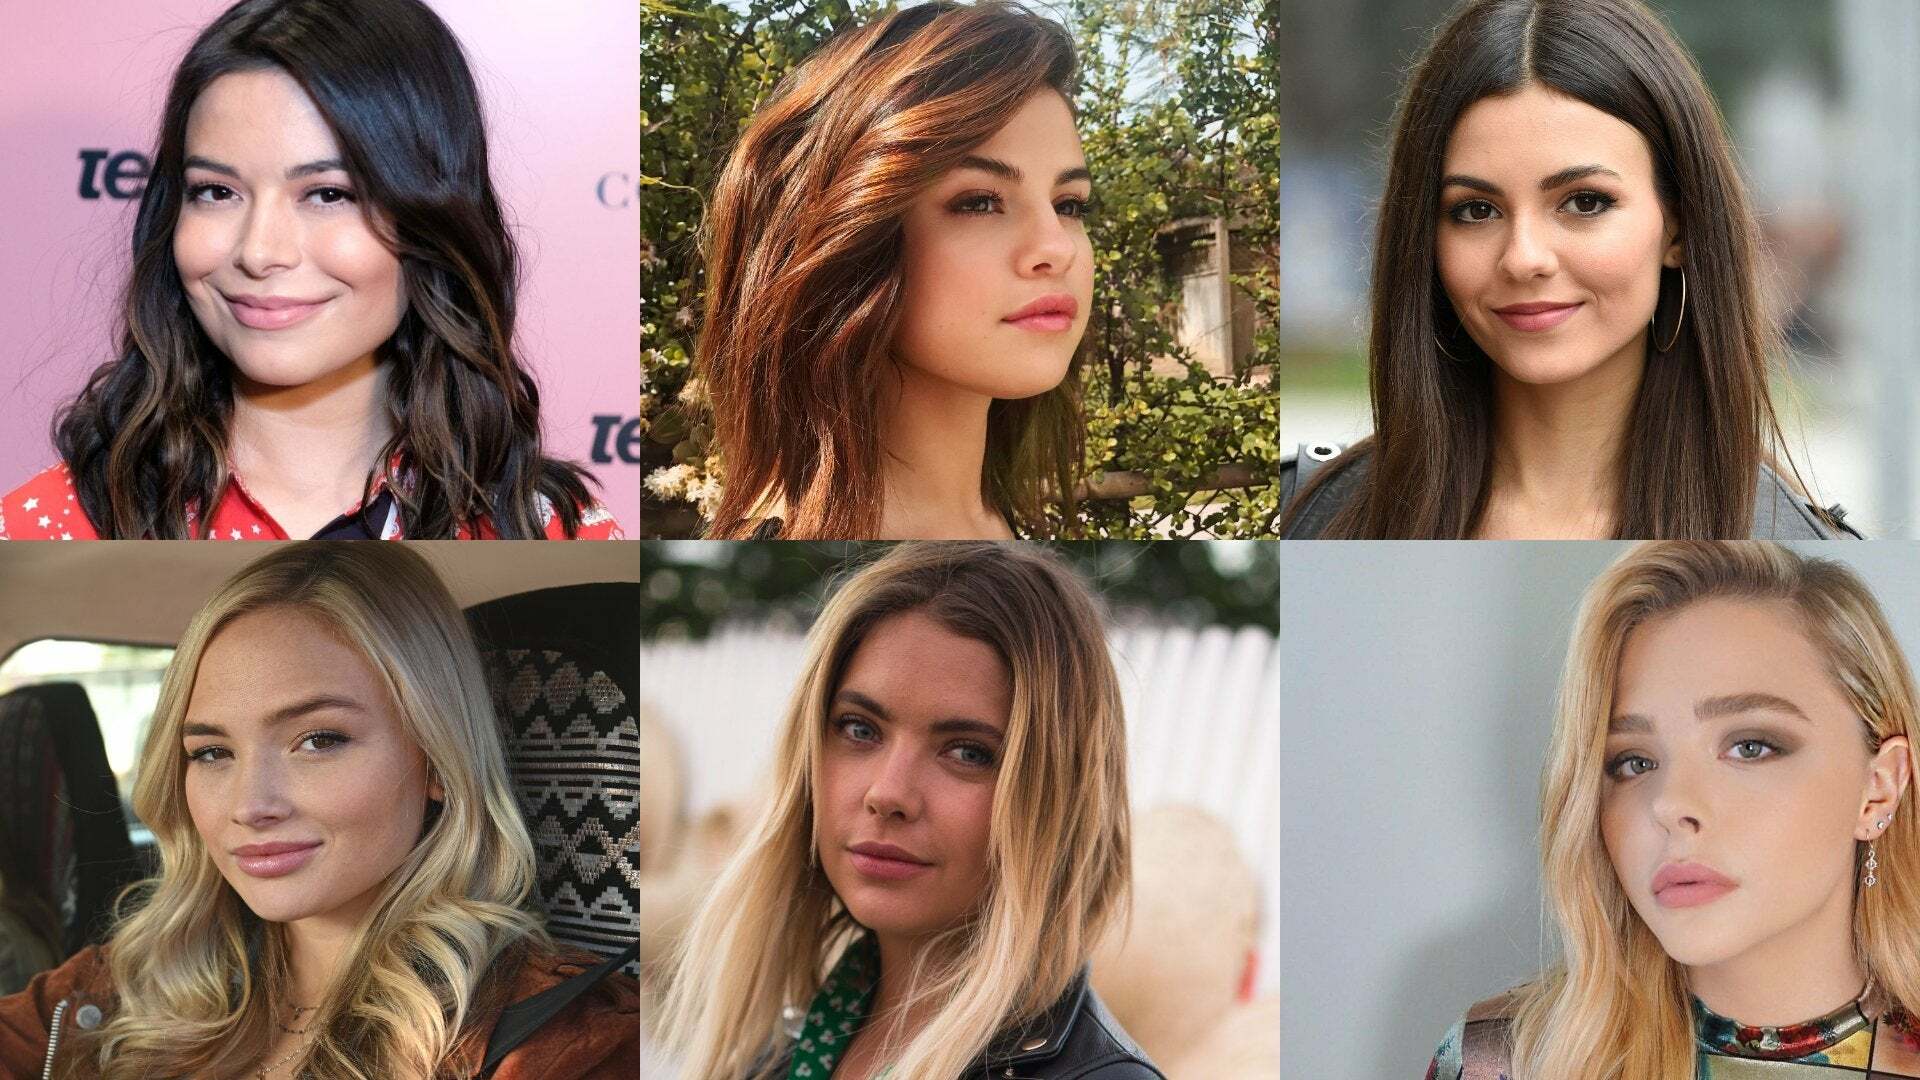 Miranda Cosgrove, Selena Gomez, Victoria Justice, Natalie Alyn Lind, Ashley Benson, Chloe Moretz. Take one for pussy, one for ass, one for sensual blowjob, one for sloppy blowjob, one for 69, one for titfuck and why